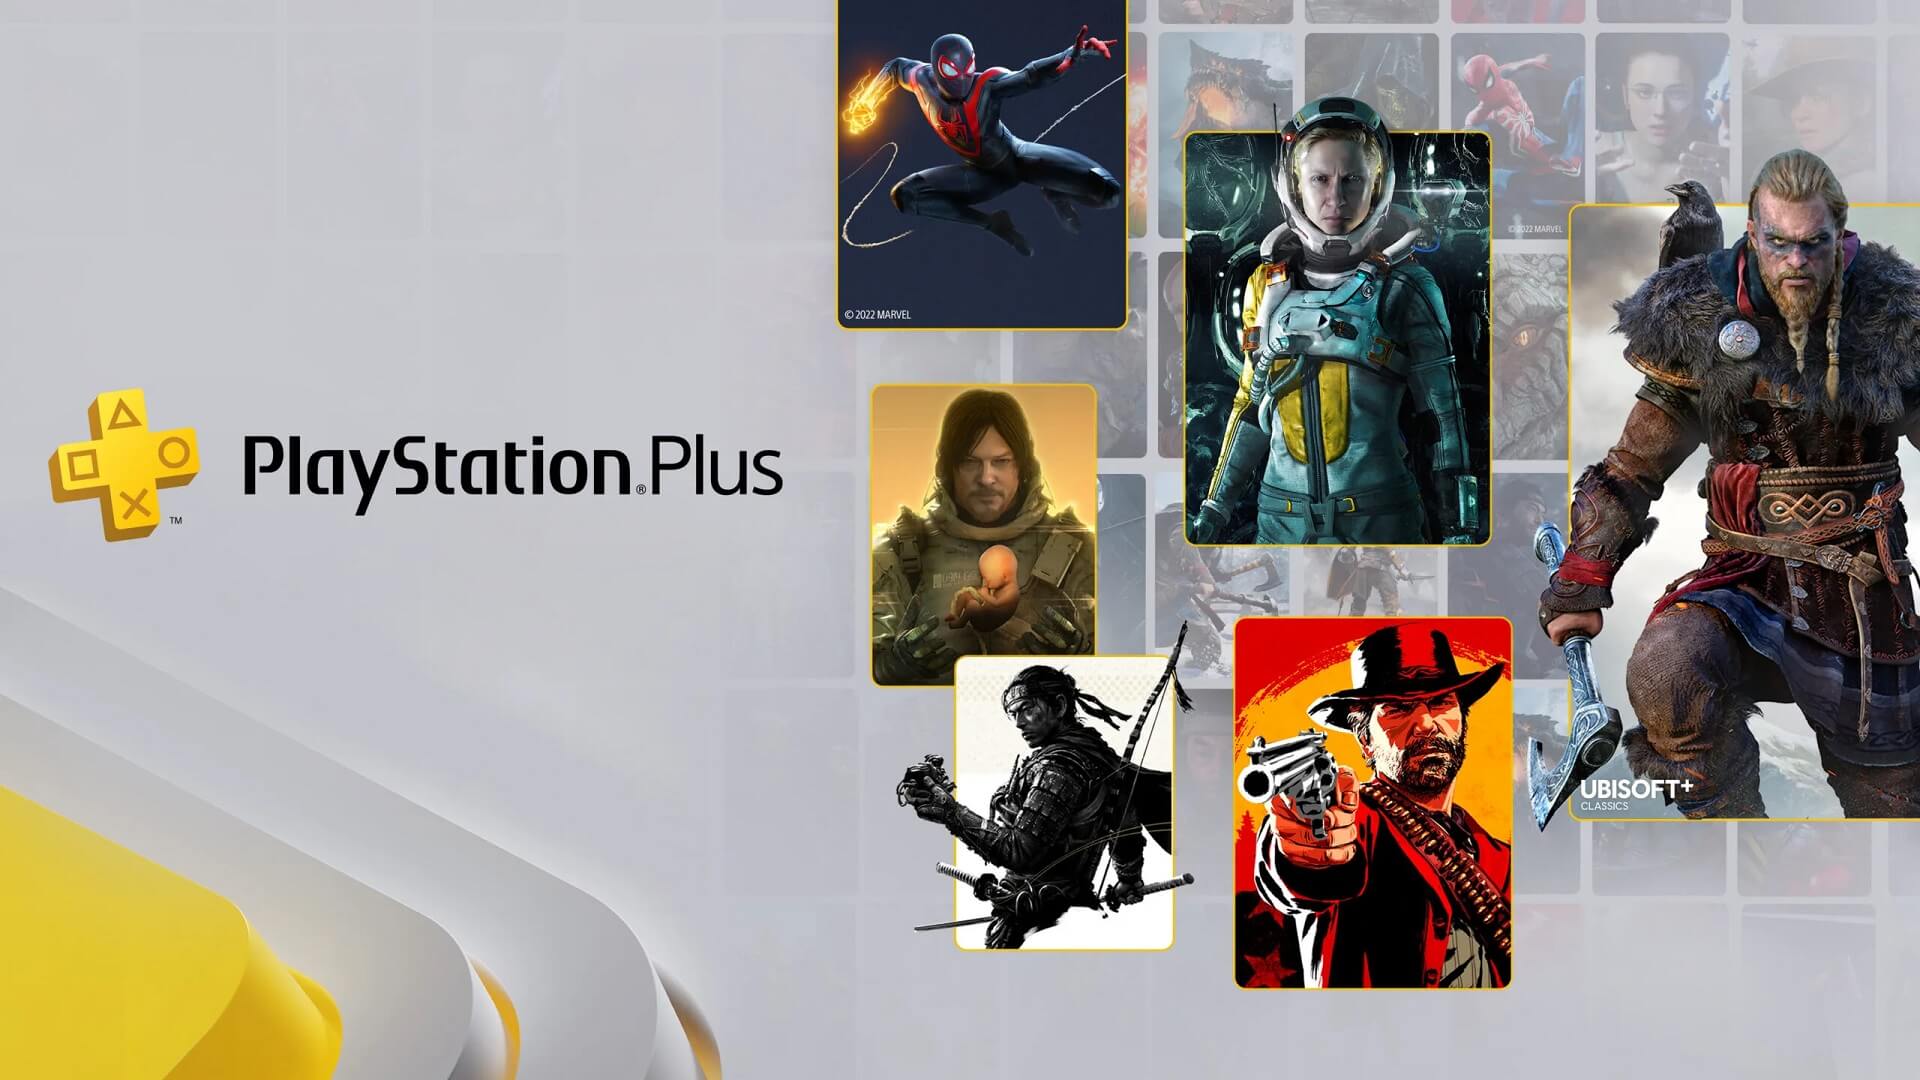 A few of the games included as part of the PlayStation Plus revamp